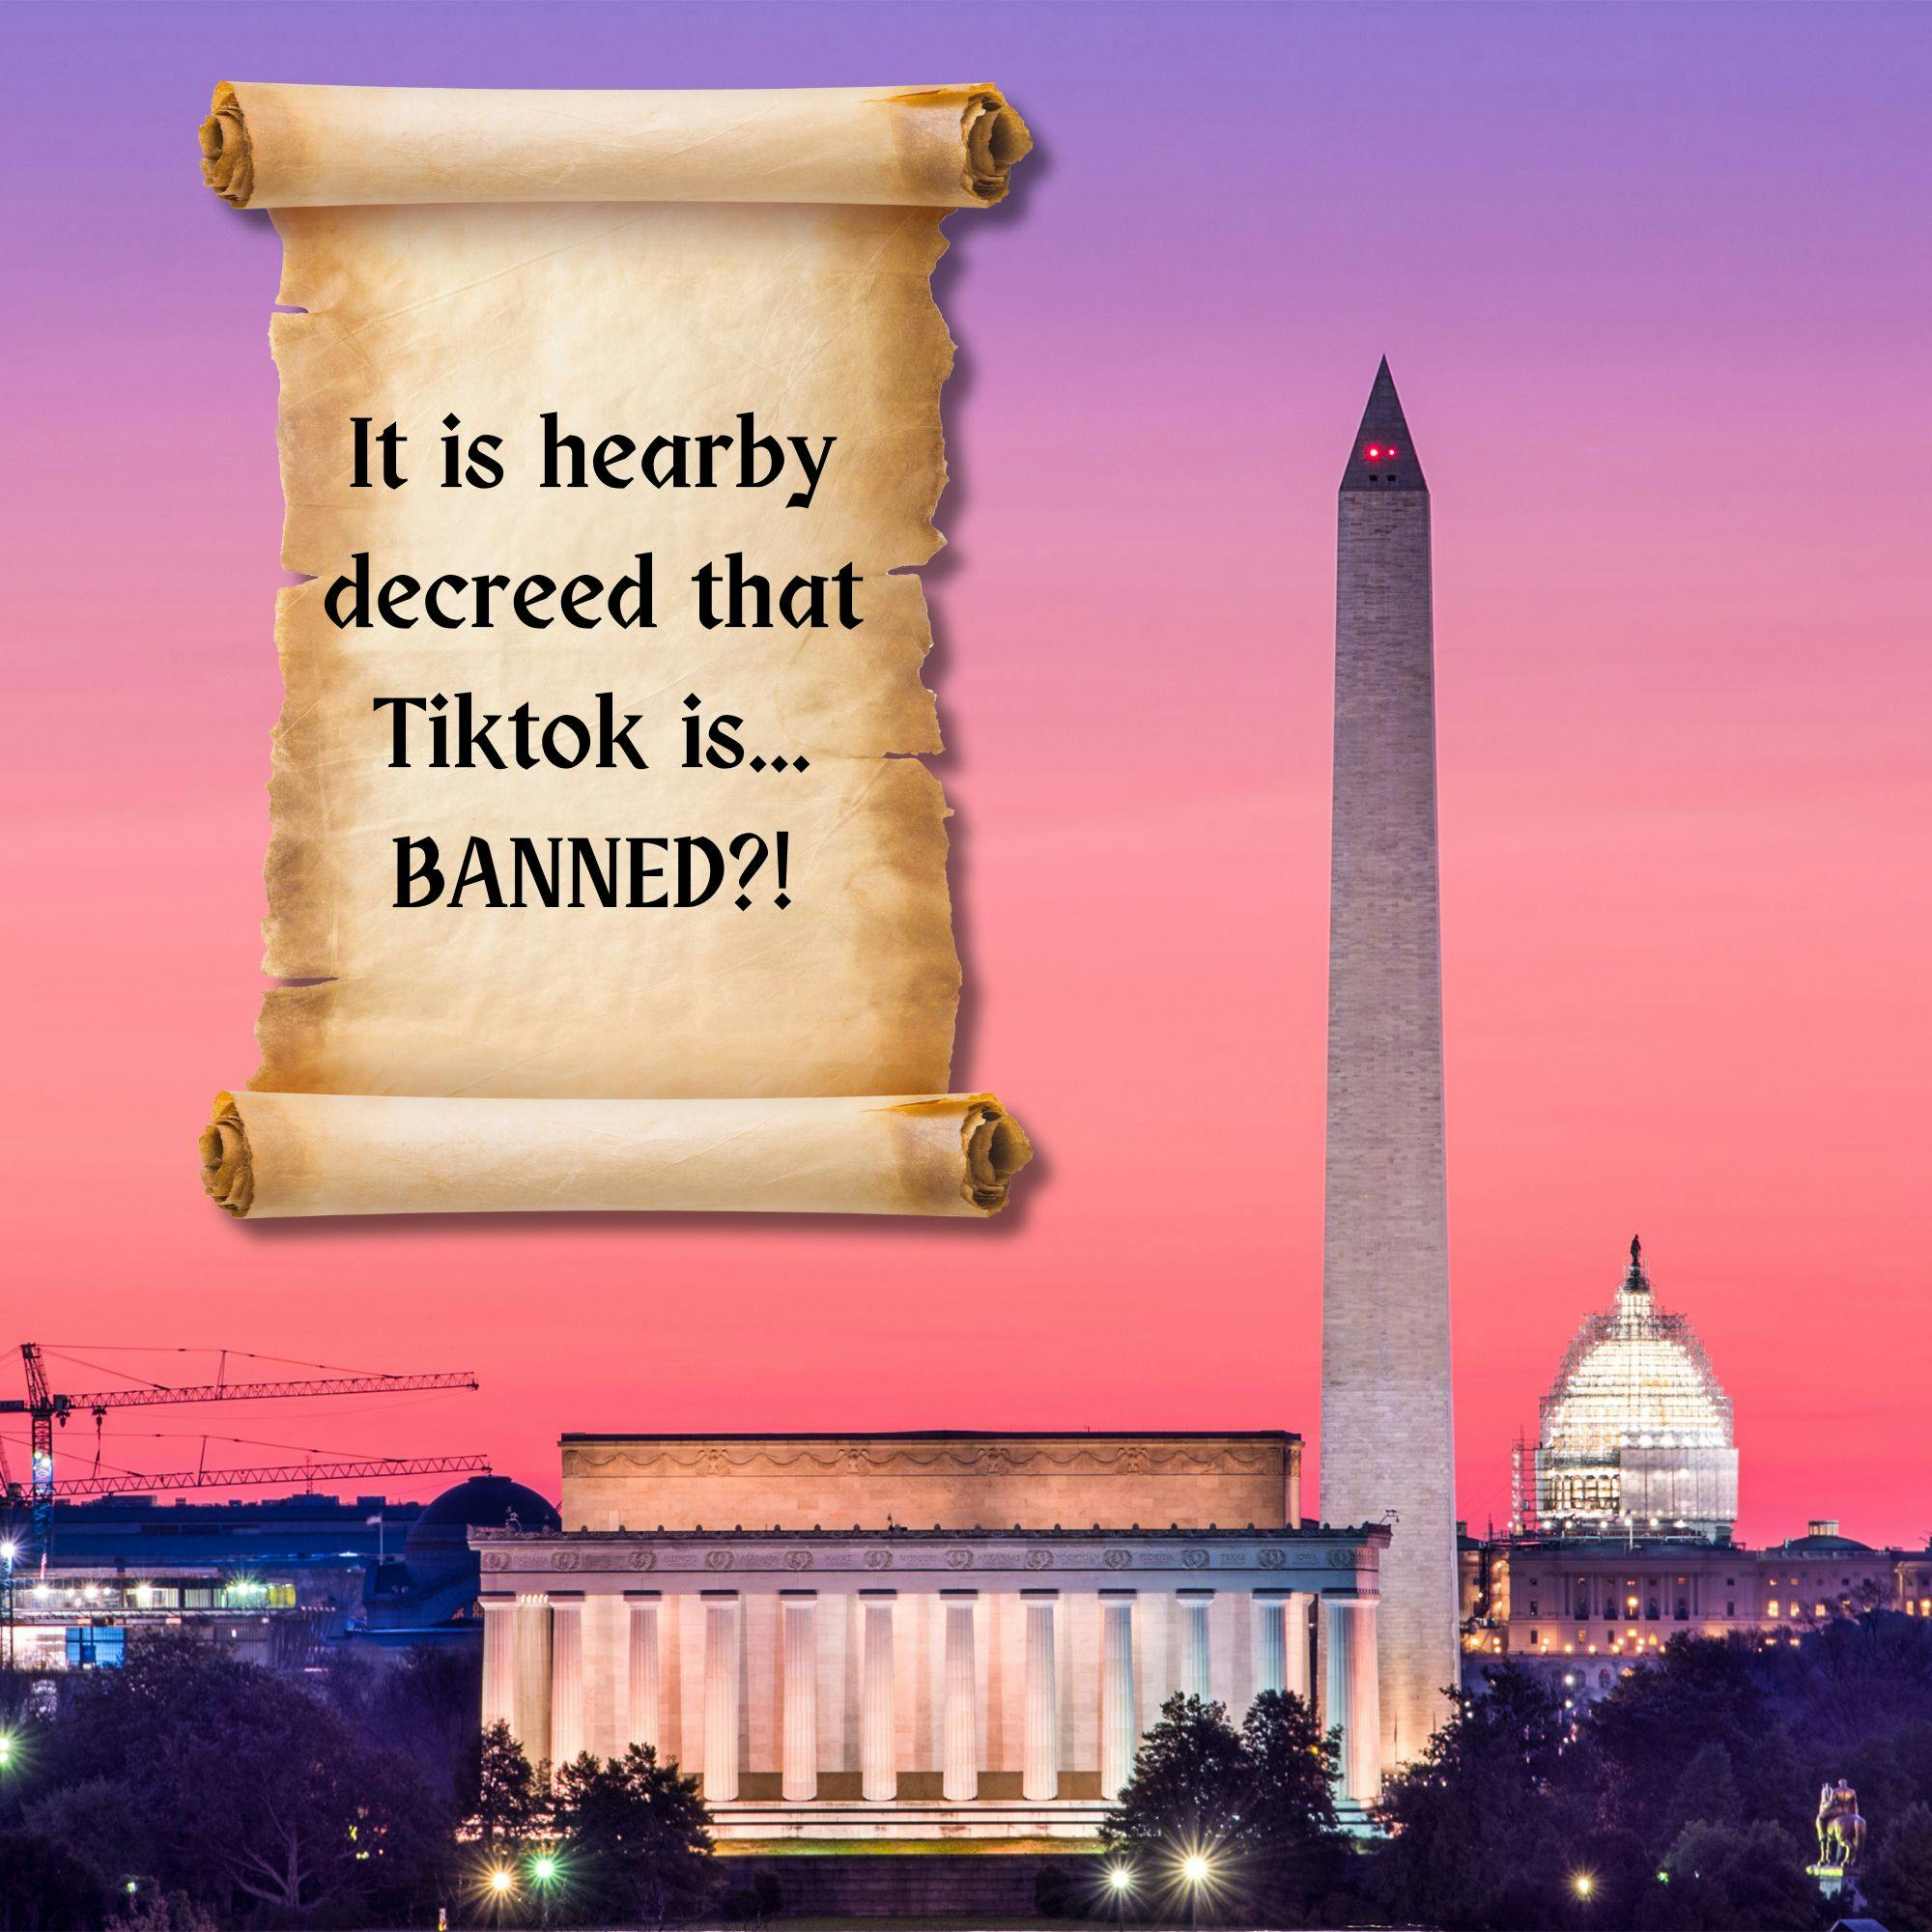 Image of the US Capitol building with a poster stating "It is hereby declared that TikTok is...bad for you?"